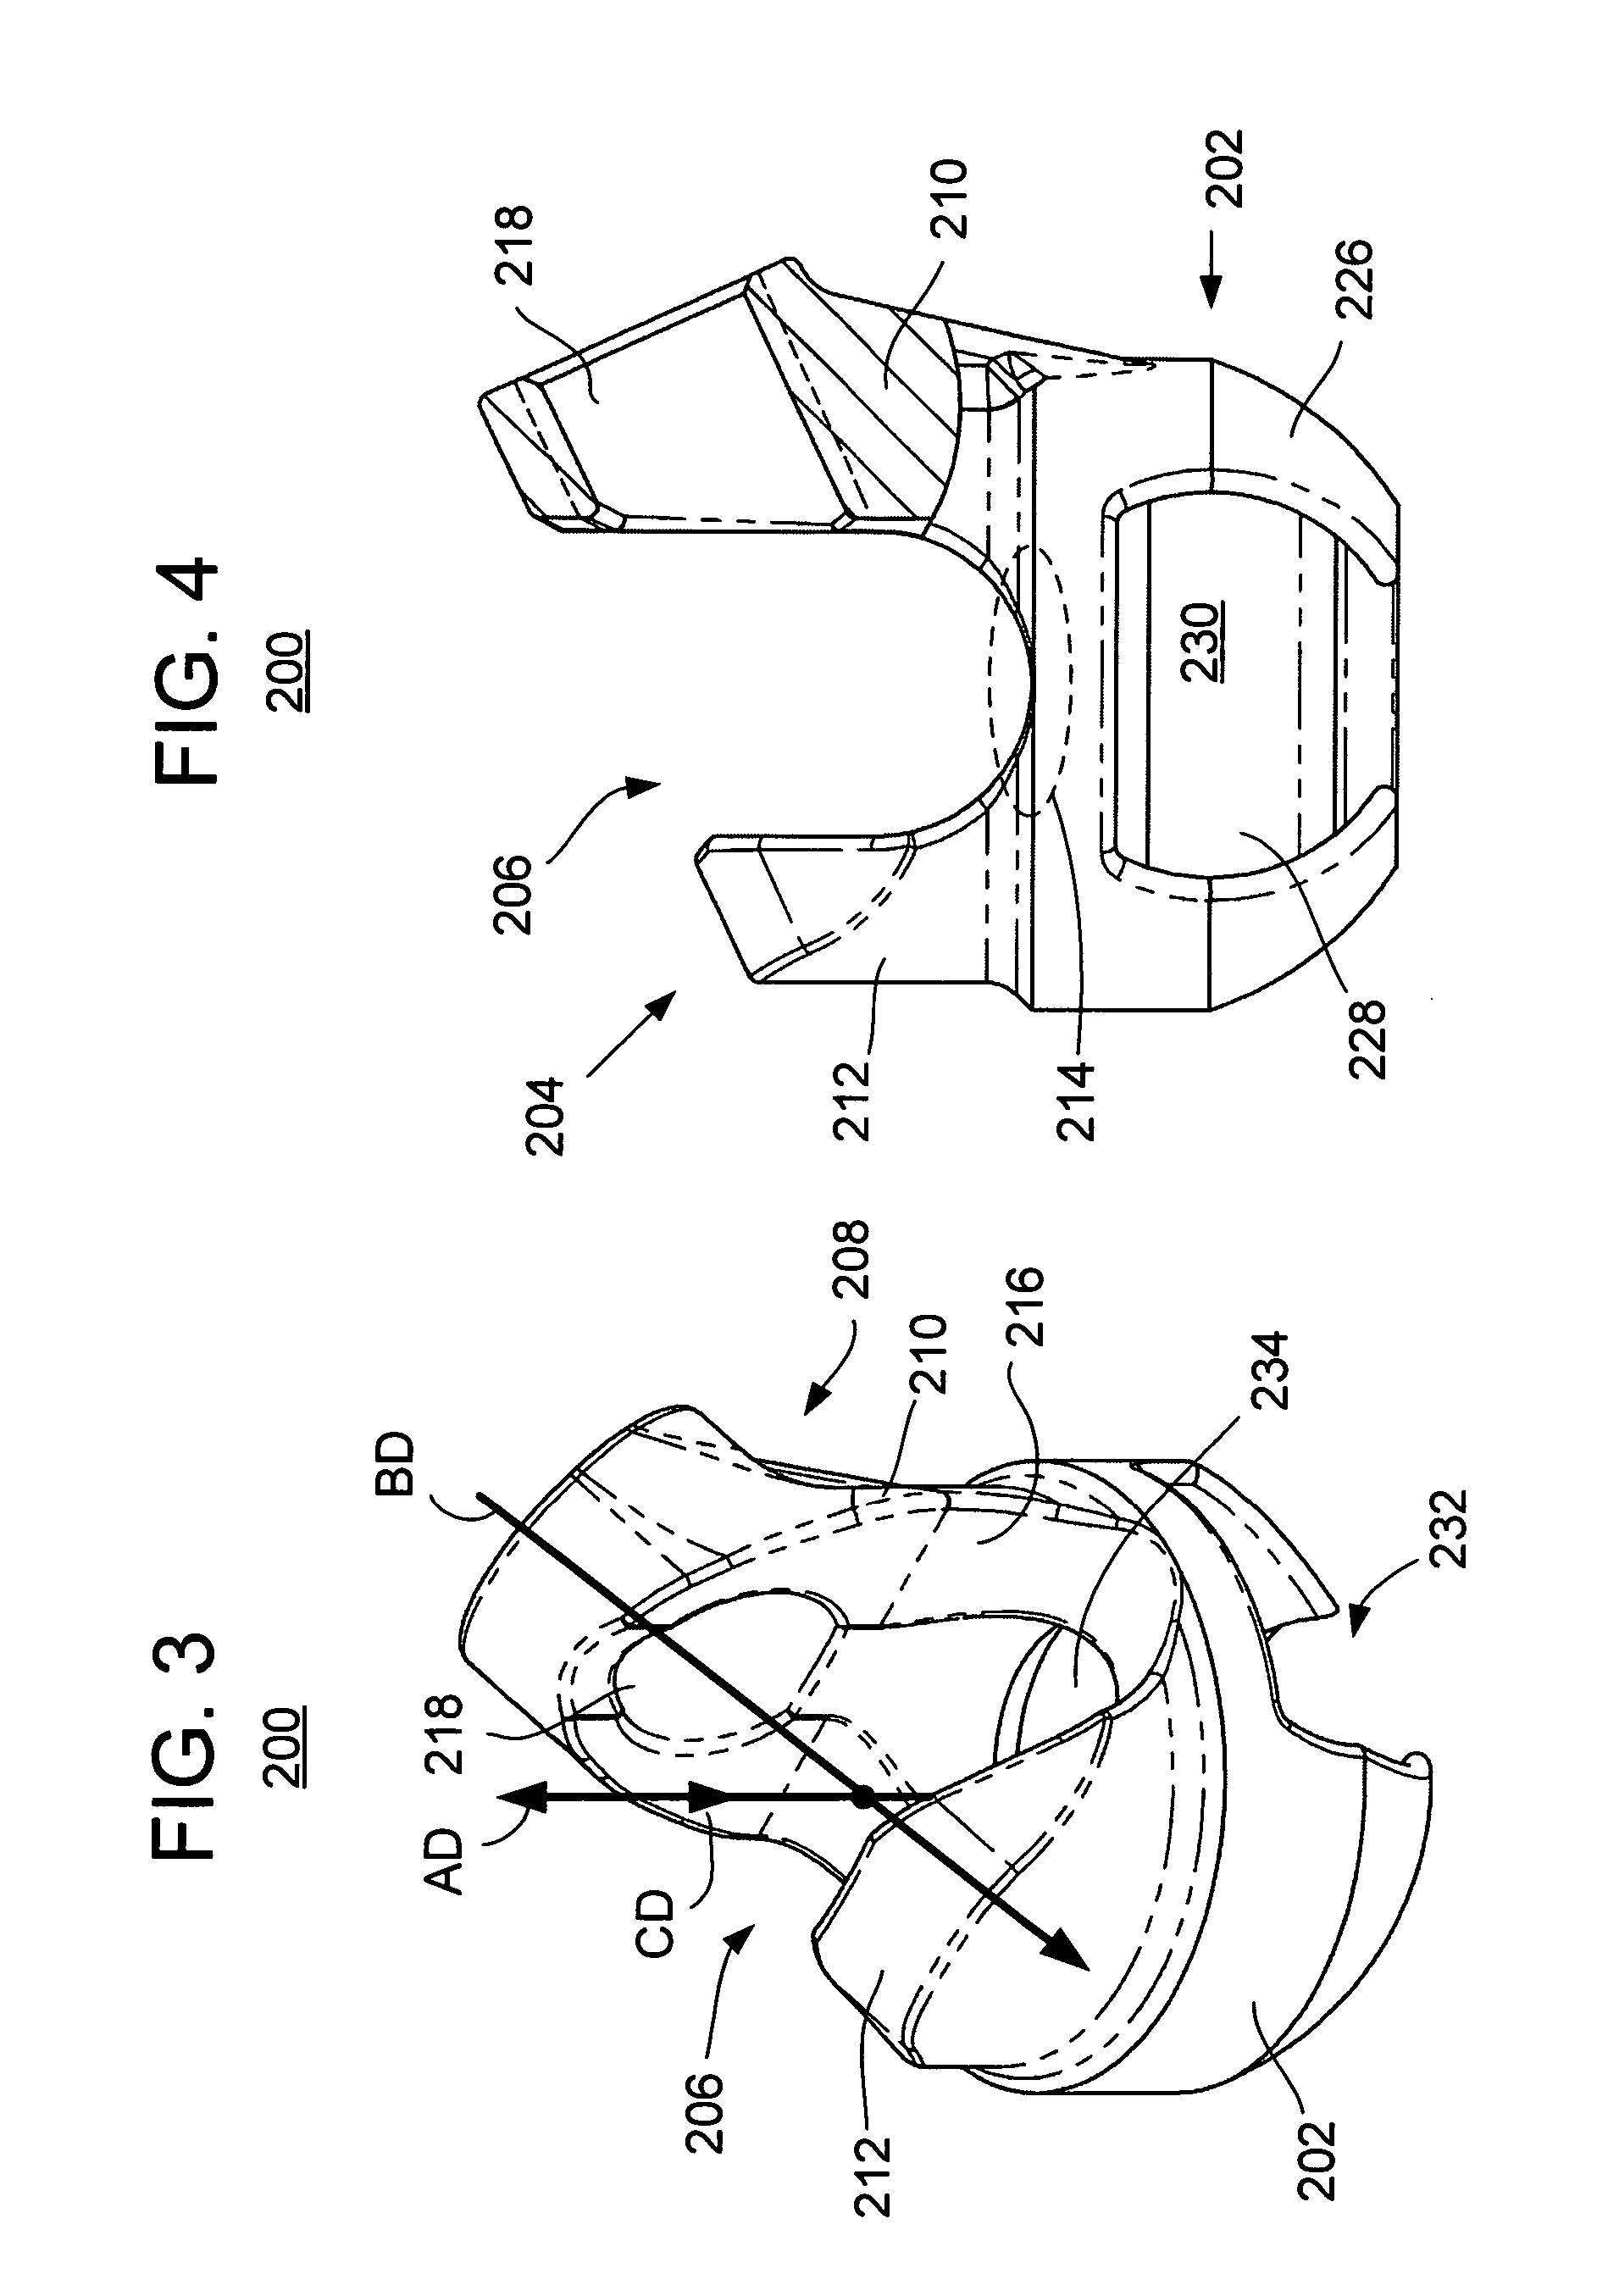 Spinal stabilization using bone anchor and anchor seat with tangential locking feature